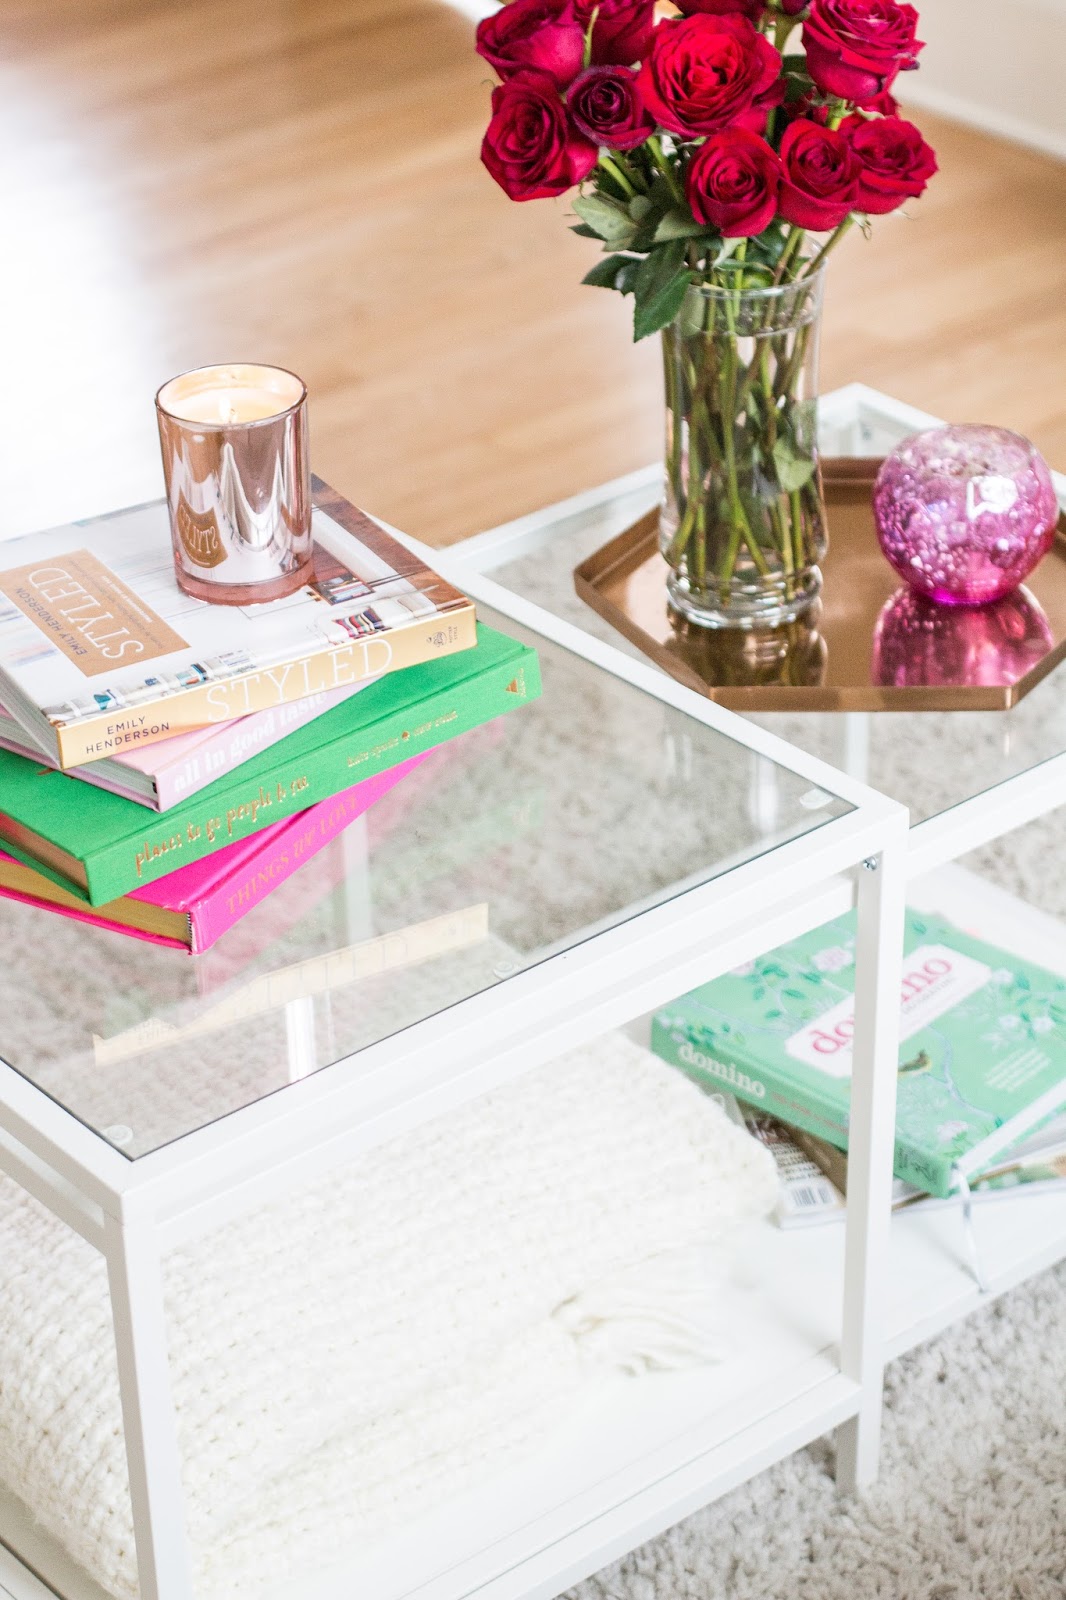 The Best Coffee Table Books - Tay Meets World